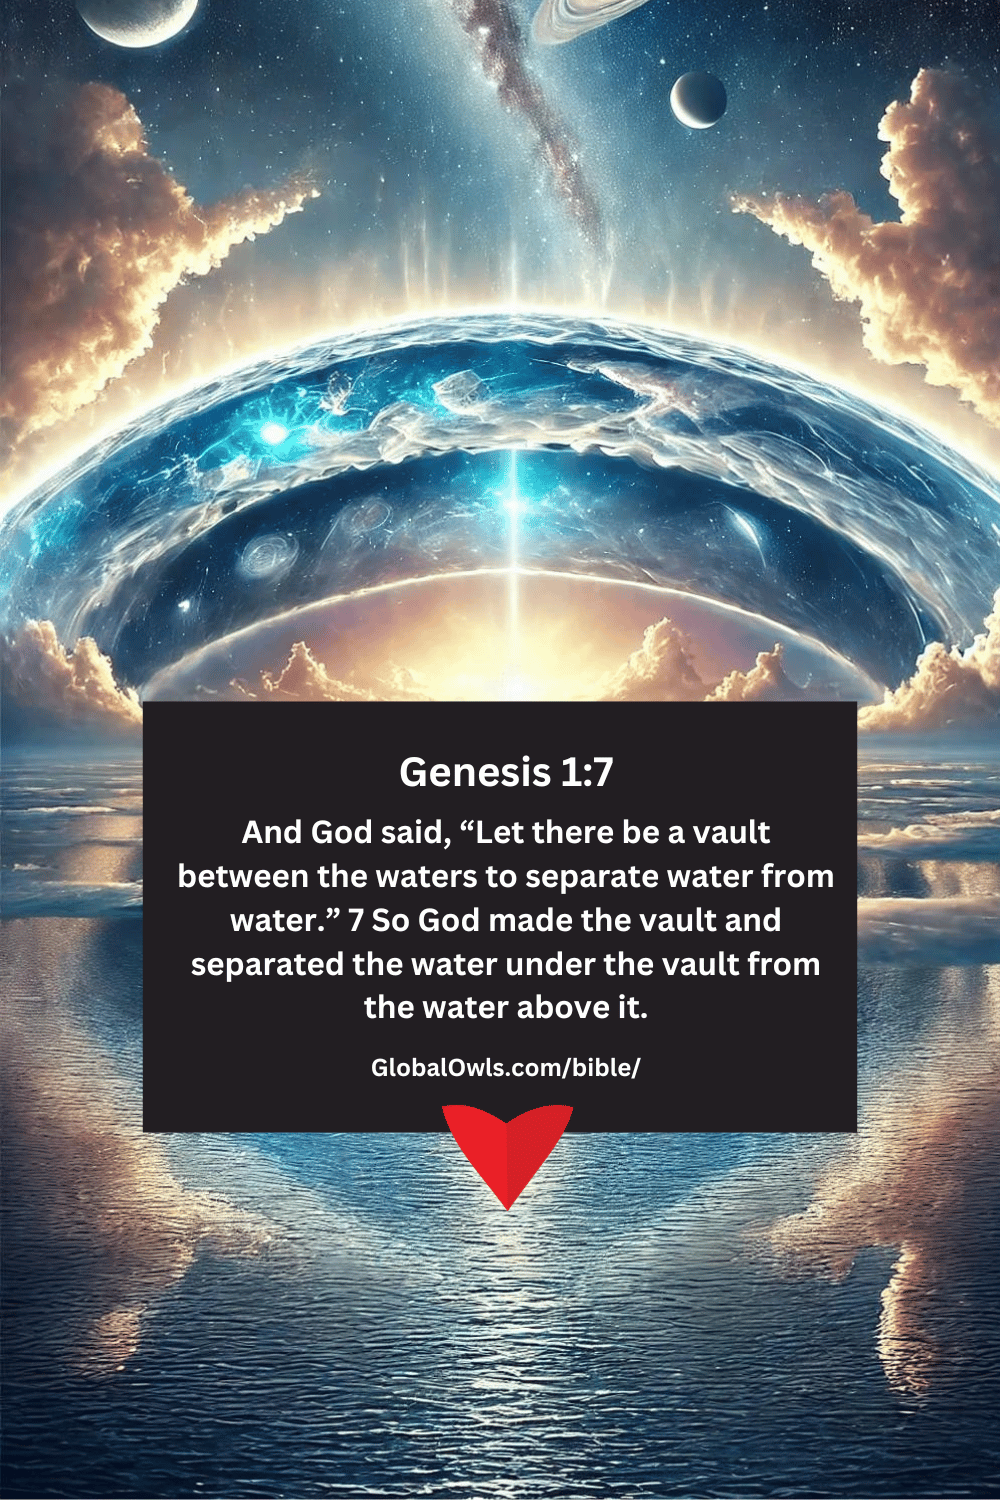 Genesis 1-7 And God said, “Let there be a vault between the waters to separate water from water.” 7 So God made the vault and separated the water under the vault from the water above it.